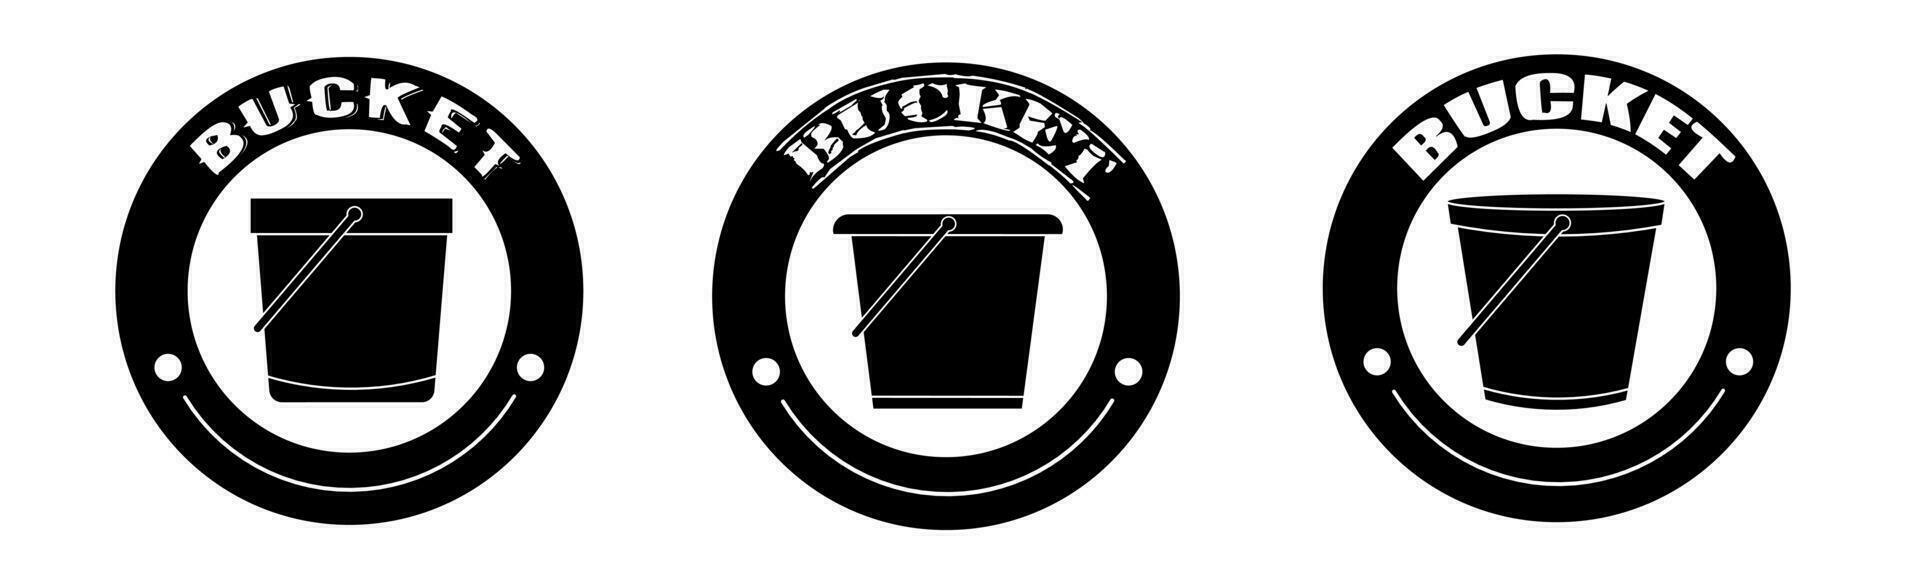 Bucket product sale icon vector illustration. Design for shop and sale banner business.